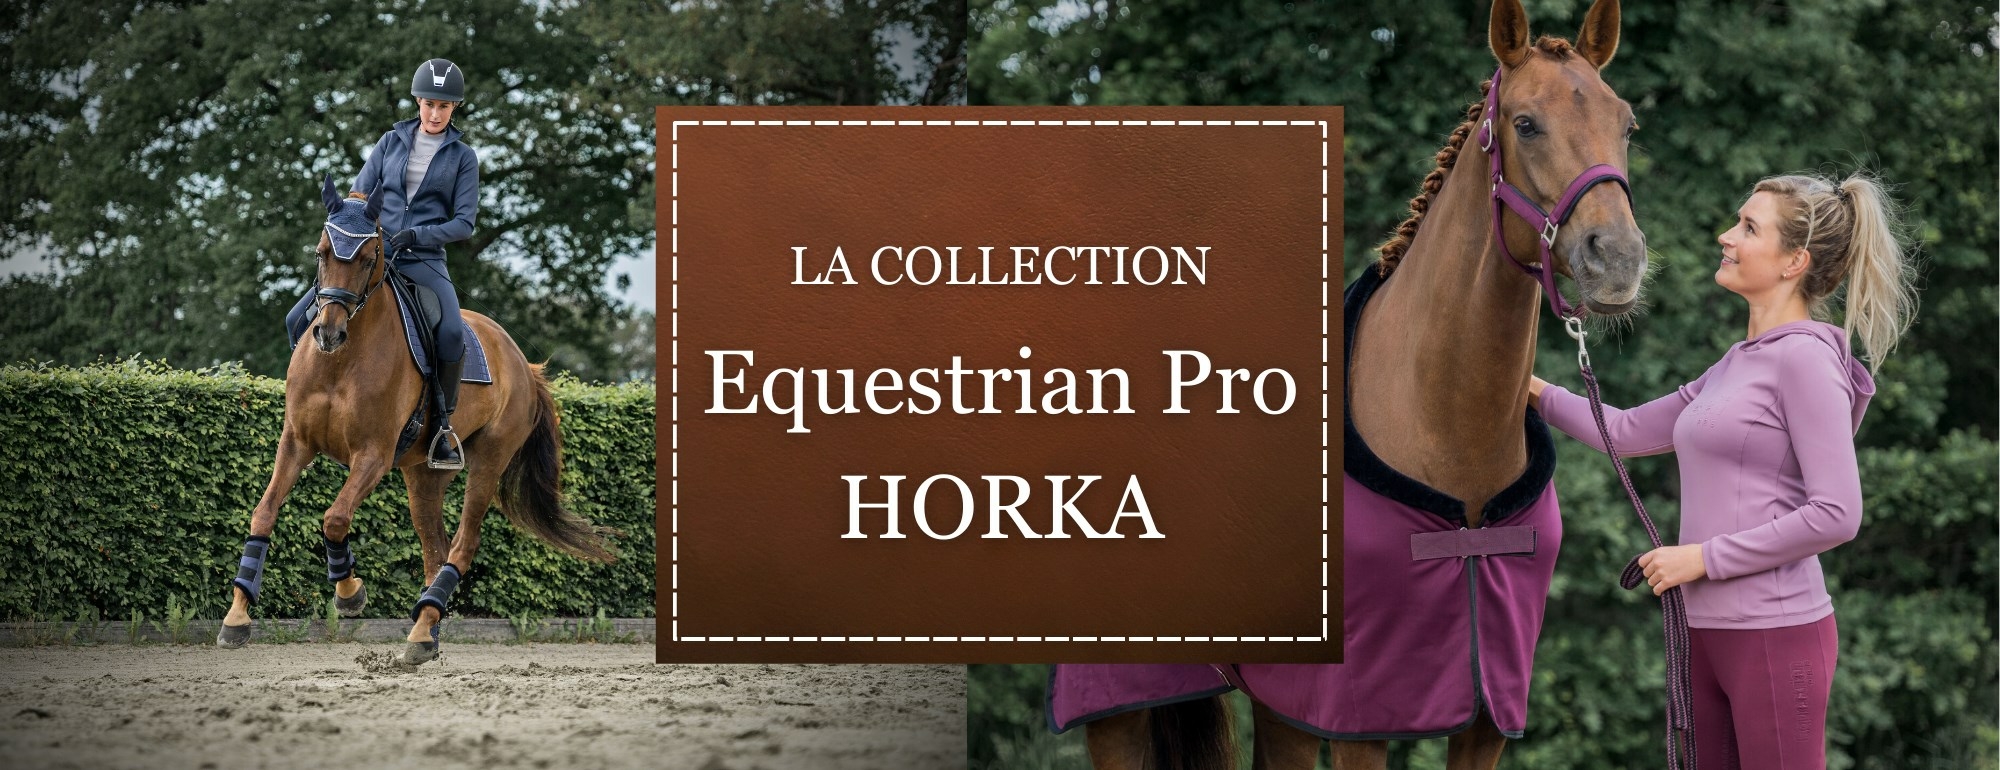 Collection Equestrian Pro Horka sellerie cpnb